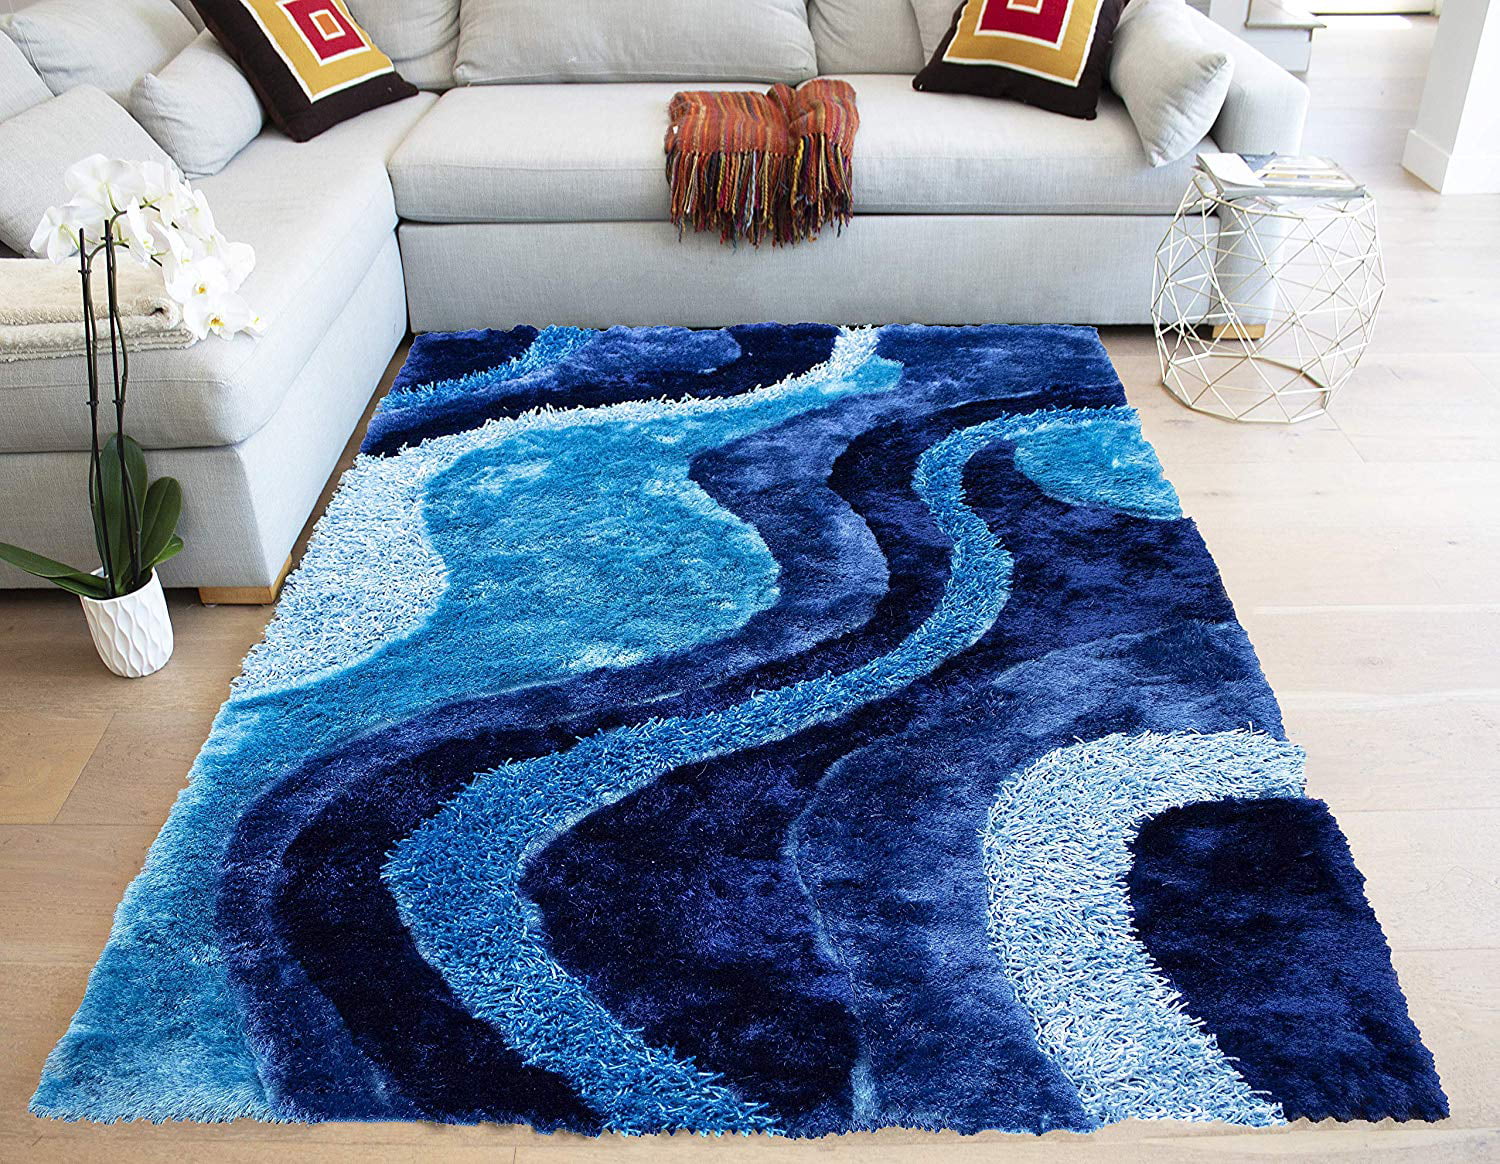 Plush Area Rugs For Living Room